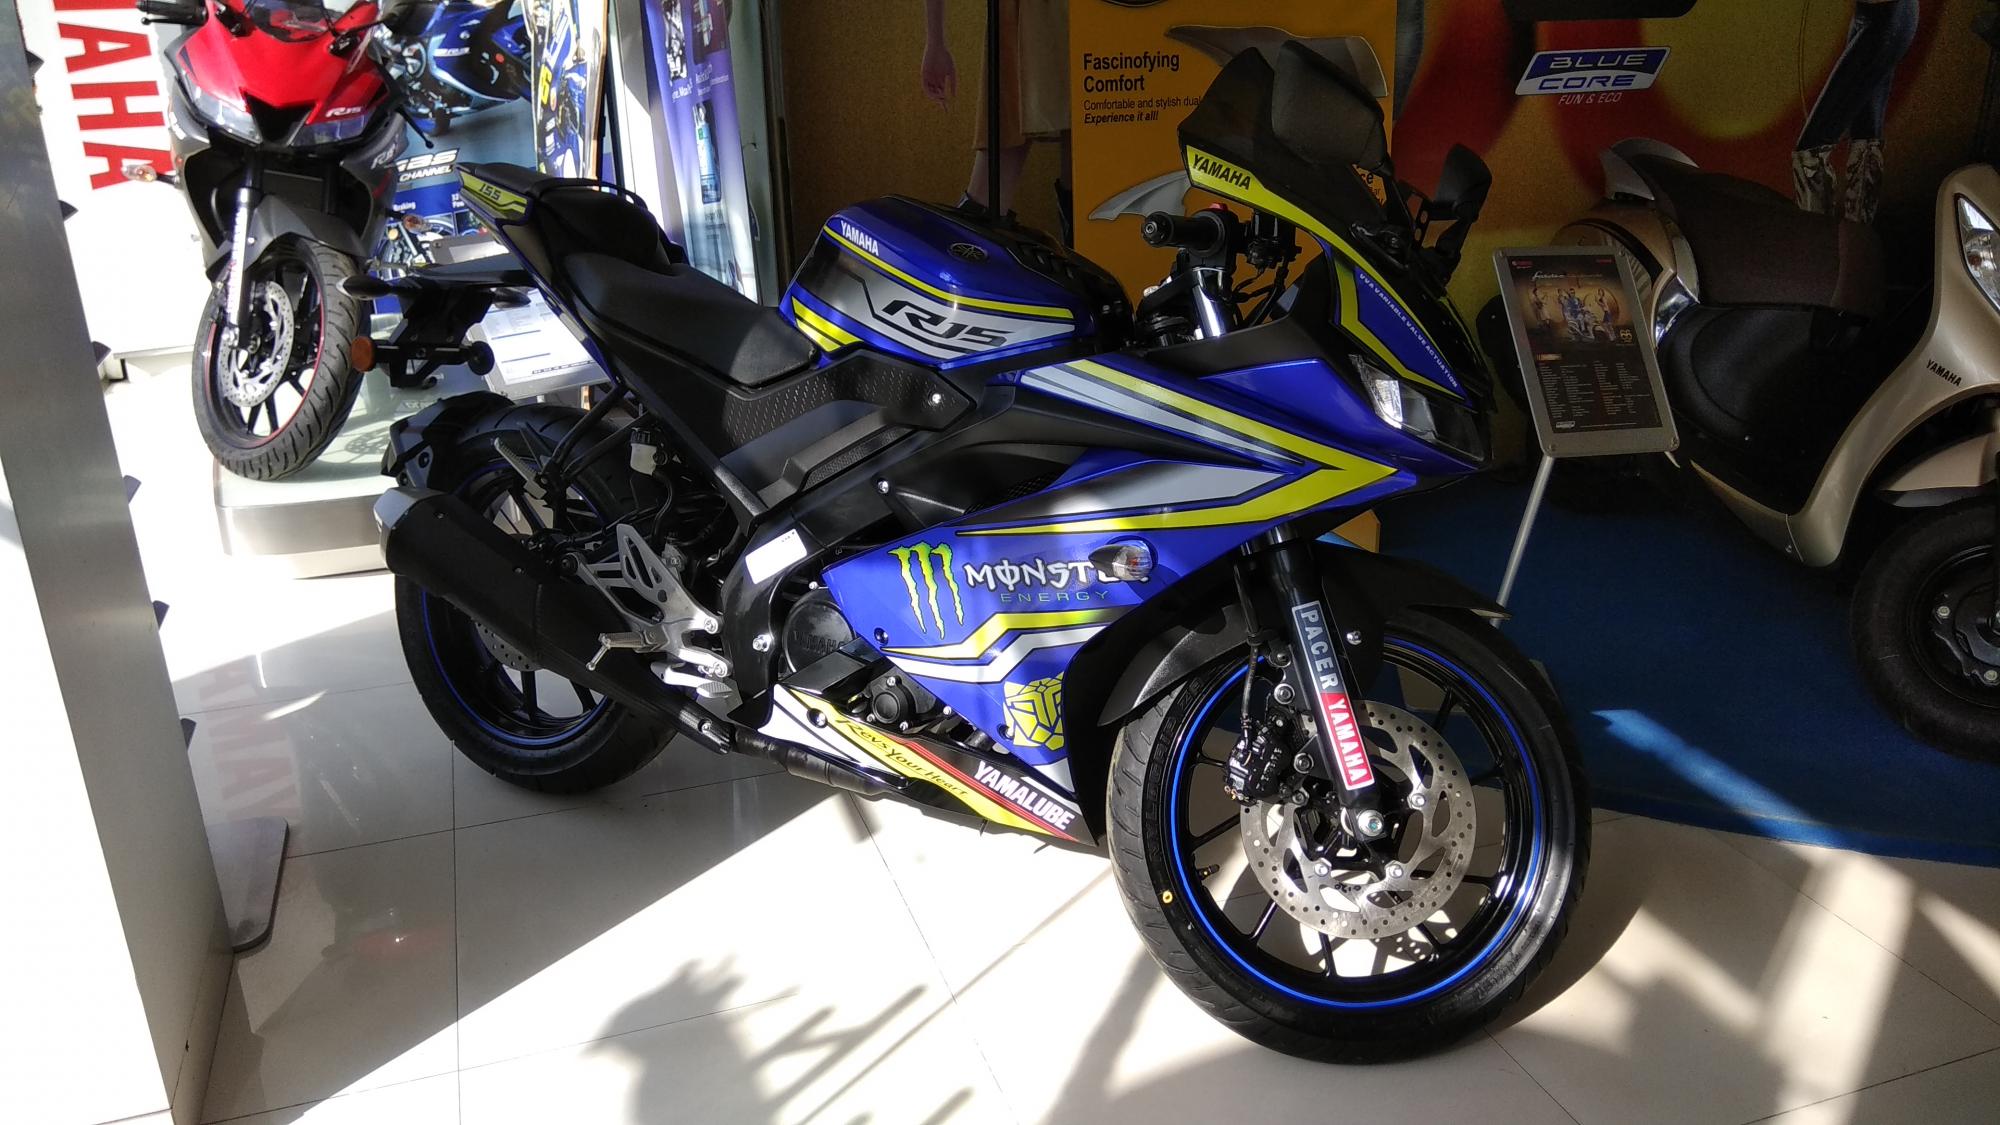 Customised Yamaha R15 V3 0 with graphics kit 8 Live images